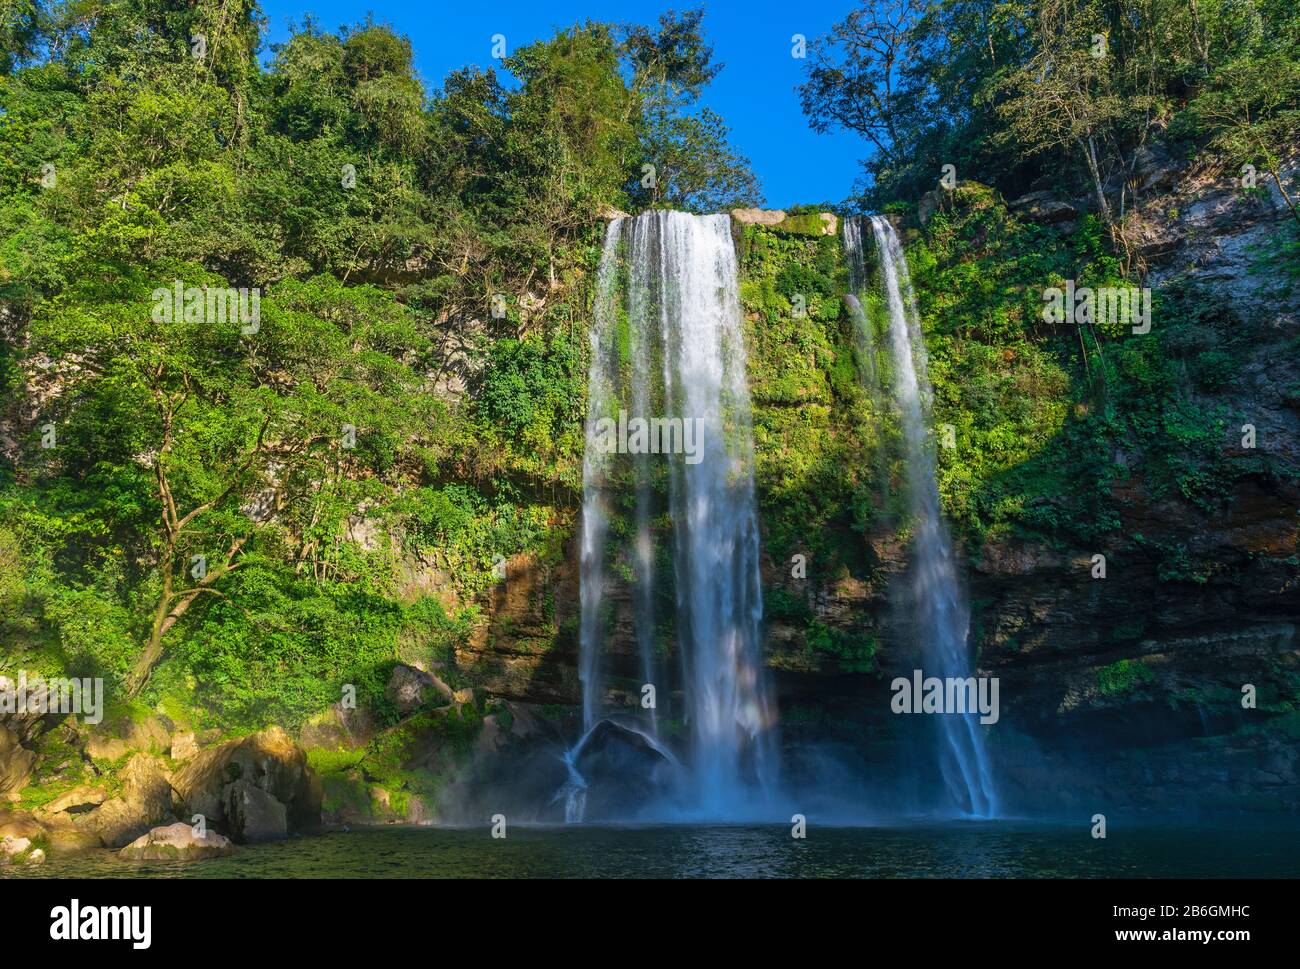 The waterfall of Misol Ha at sunset with spray in the air near Palenque, Chiapas state, Mexico. Stock Photo